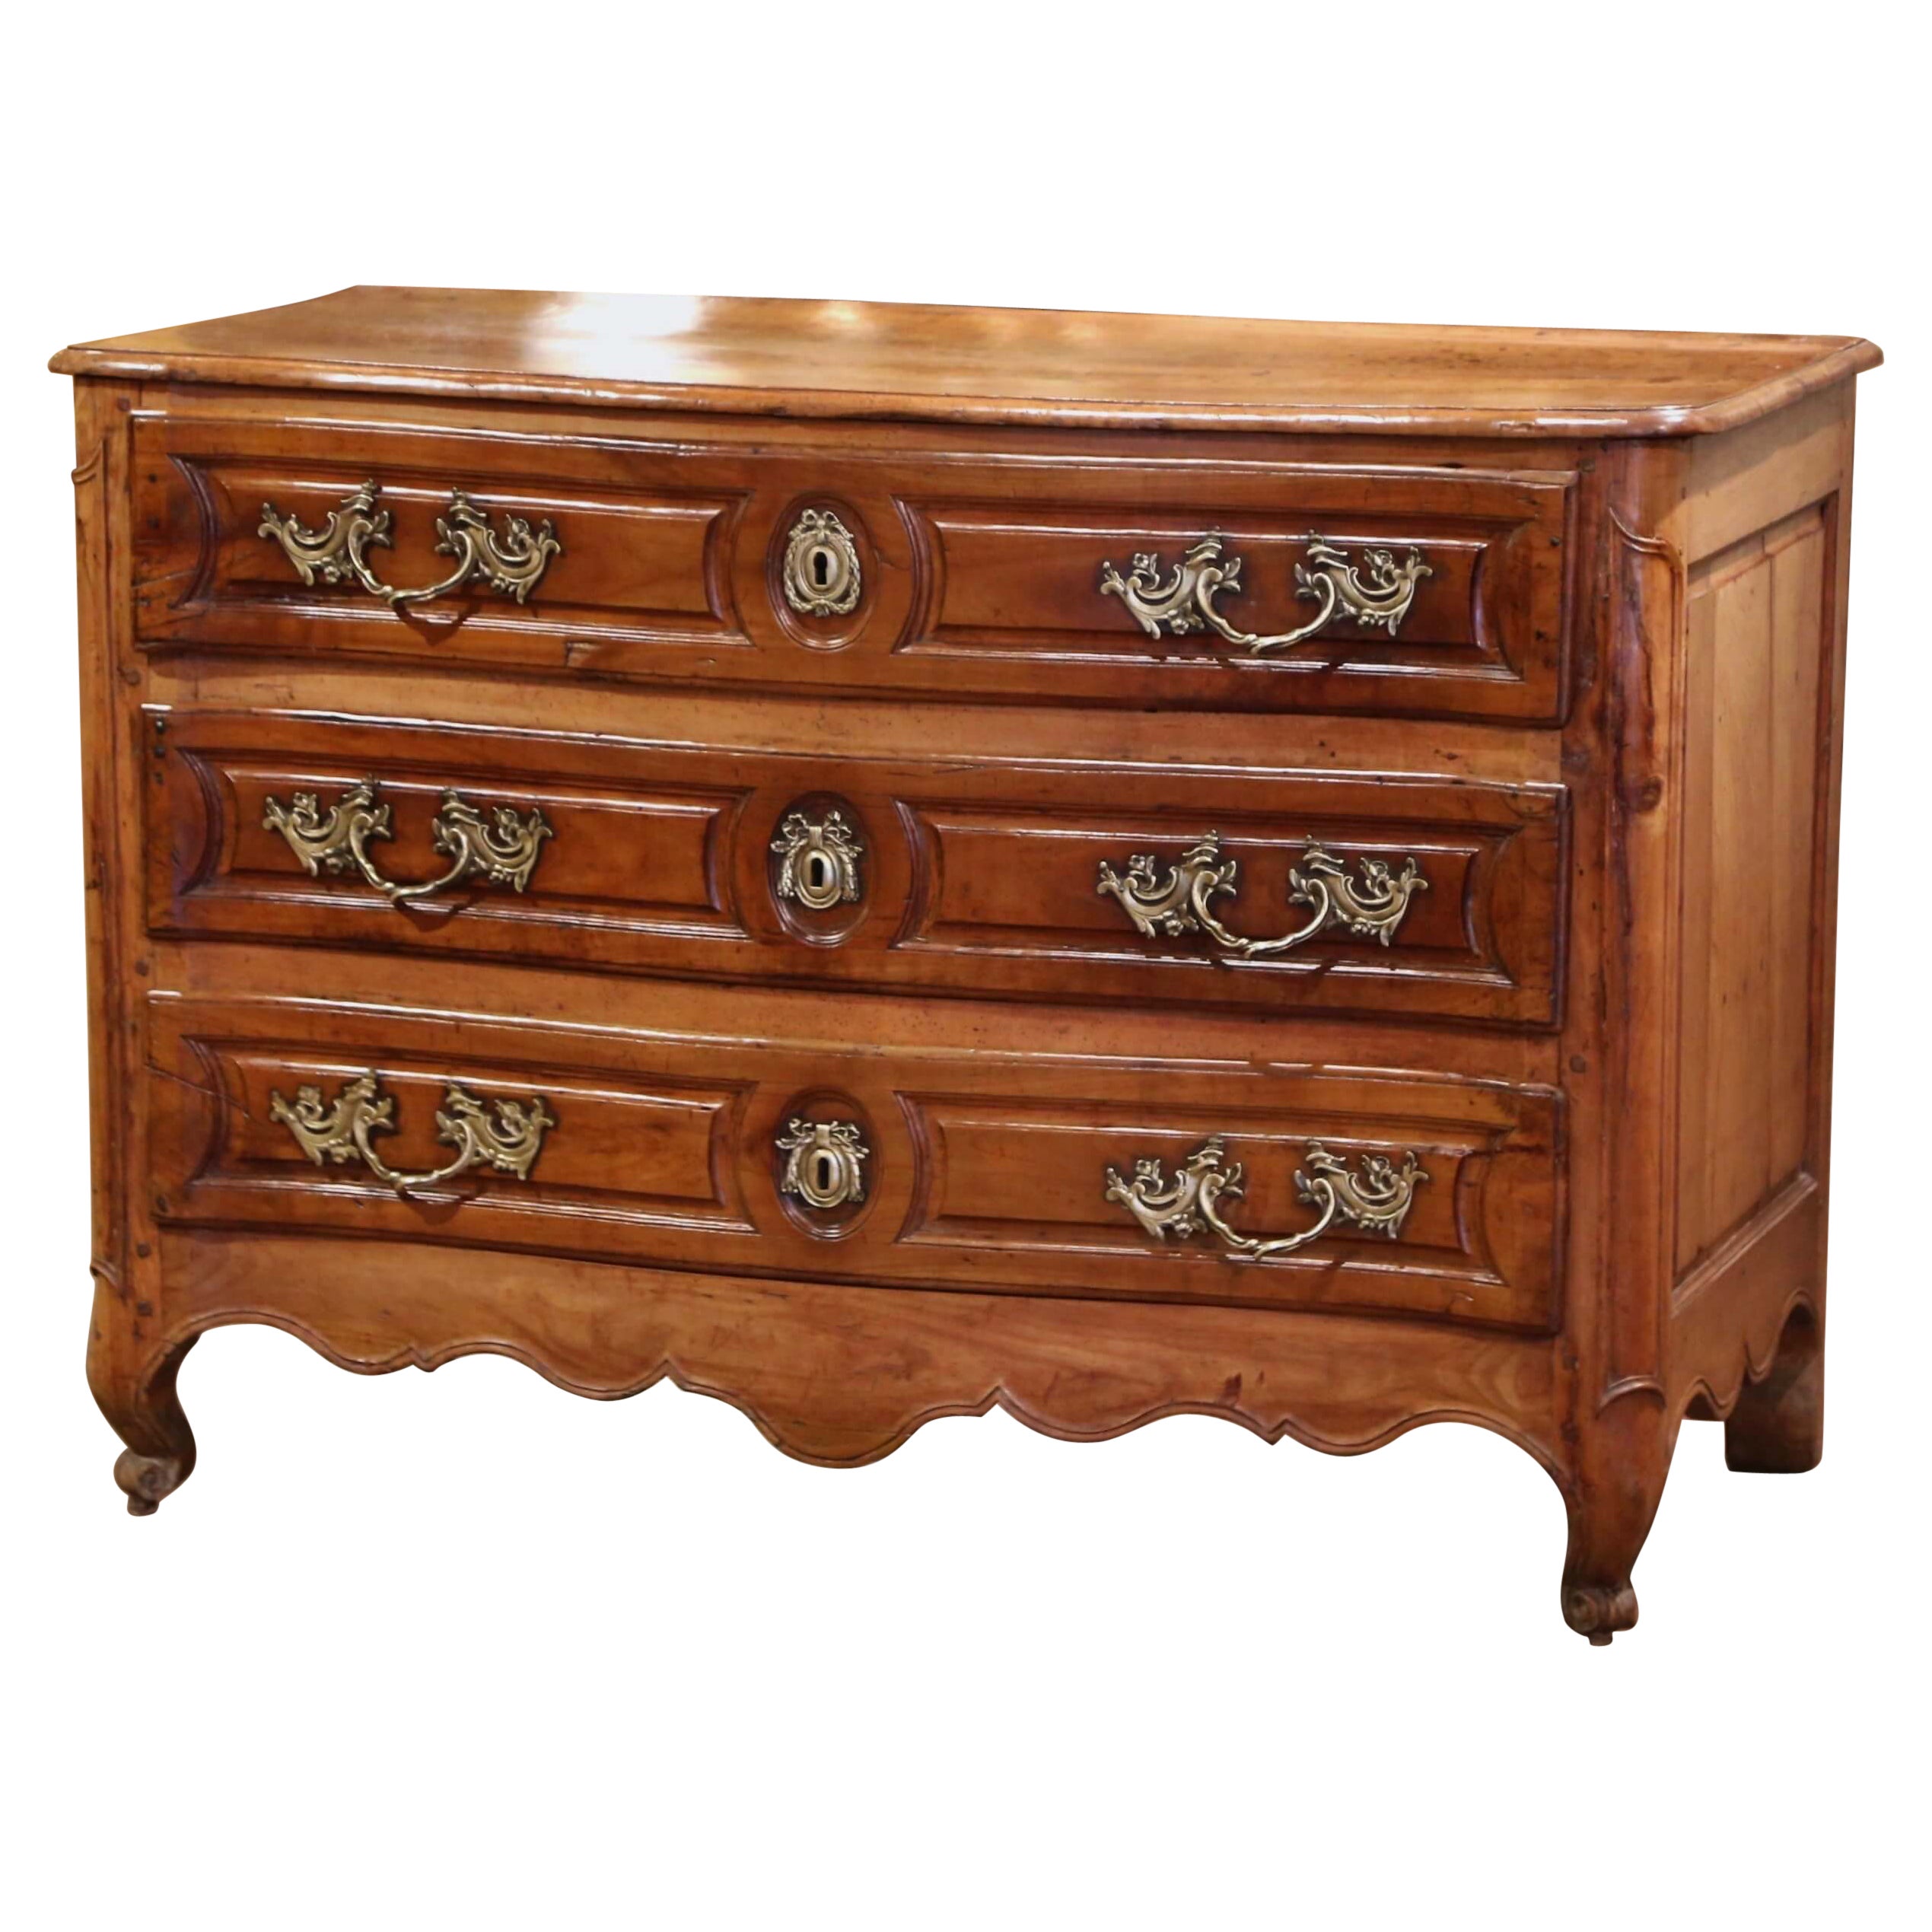 Mid-18th Century French Louis XV Carved Walnut Three Drawer Commode Chest